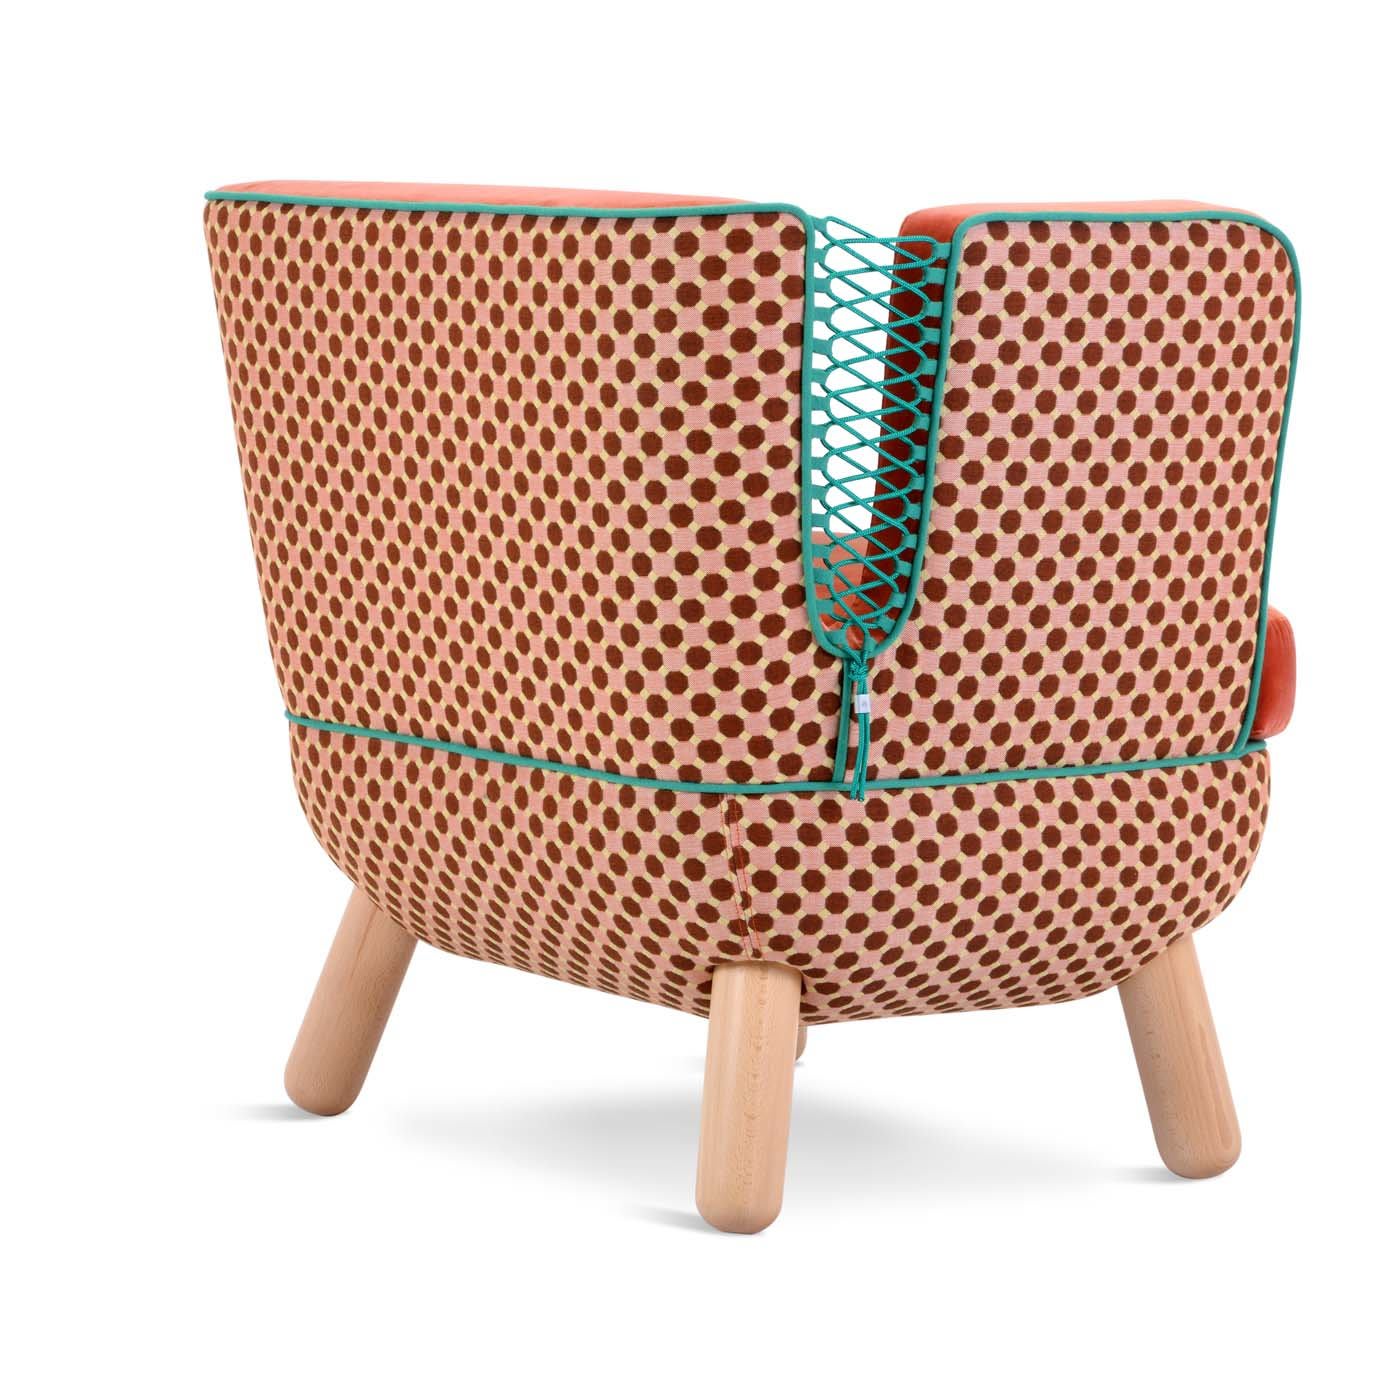 Sly Low Armchair with Ropes By Italo Pertichini rombi - Adrenalina